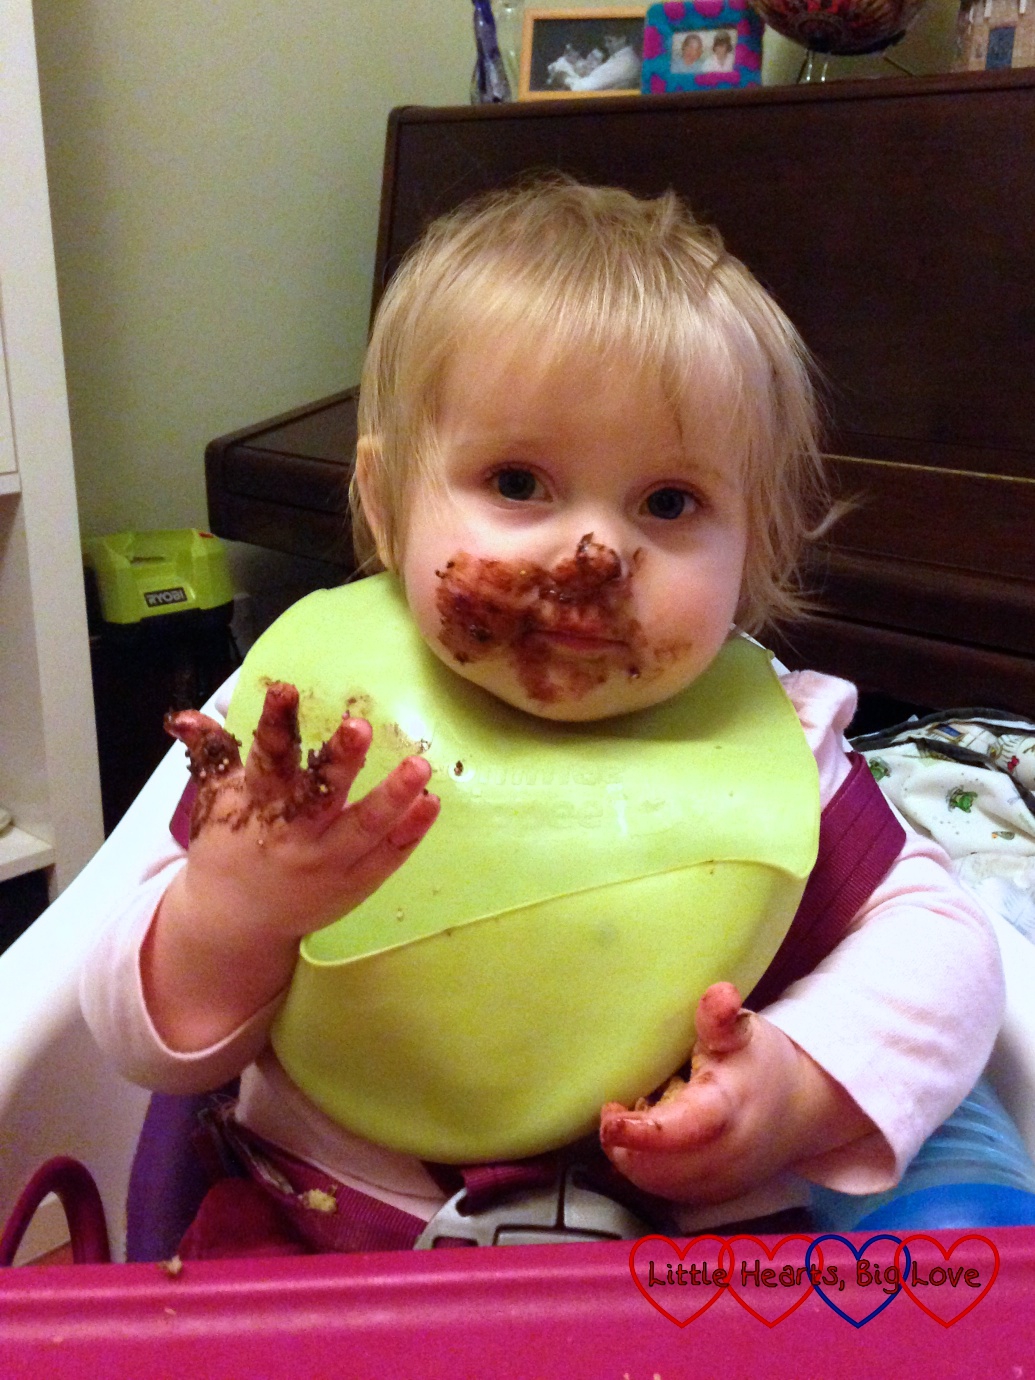 Baby Sophie with her face covered in chocolate